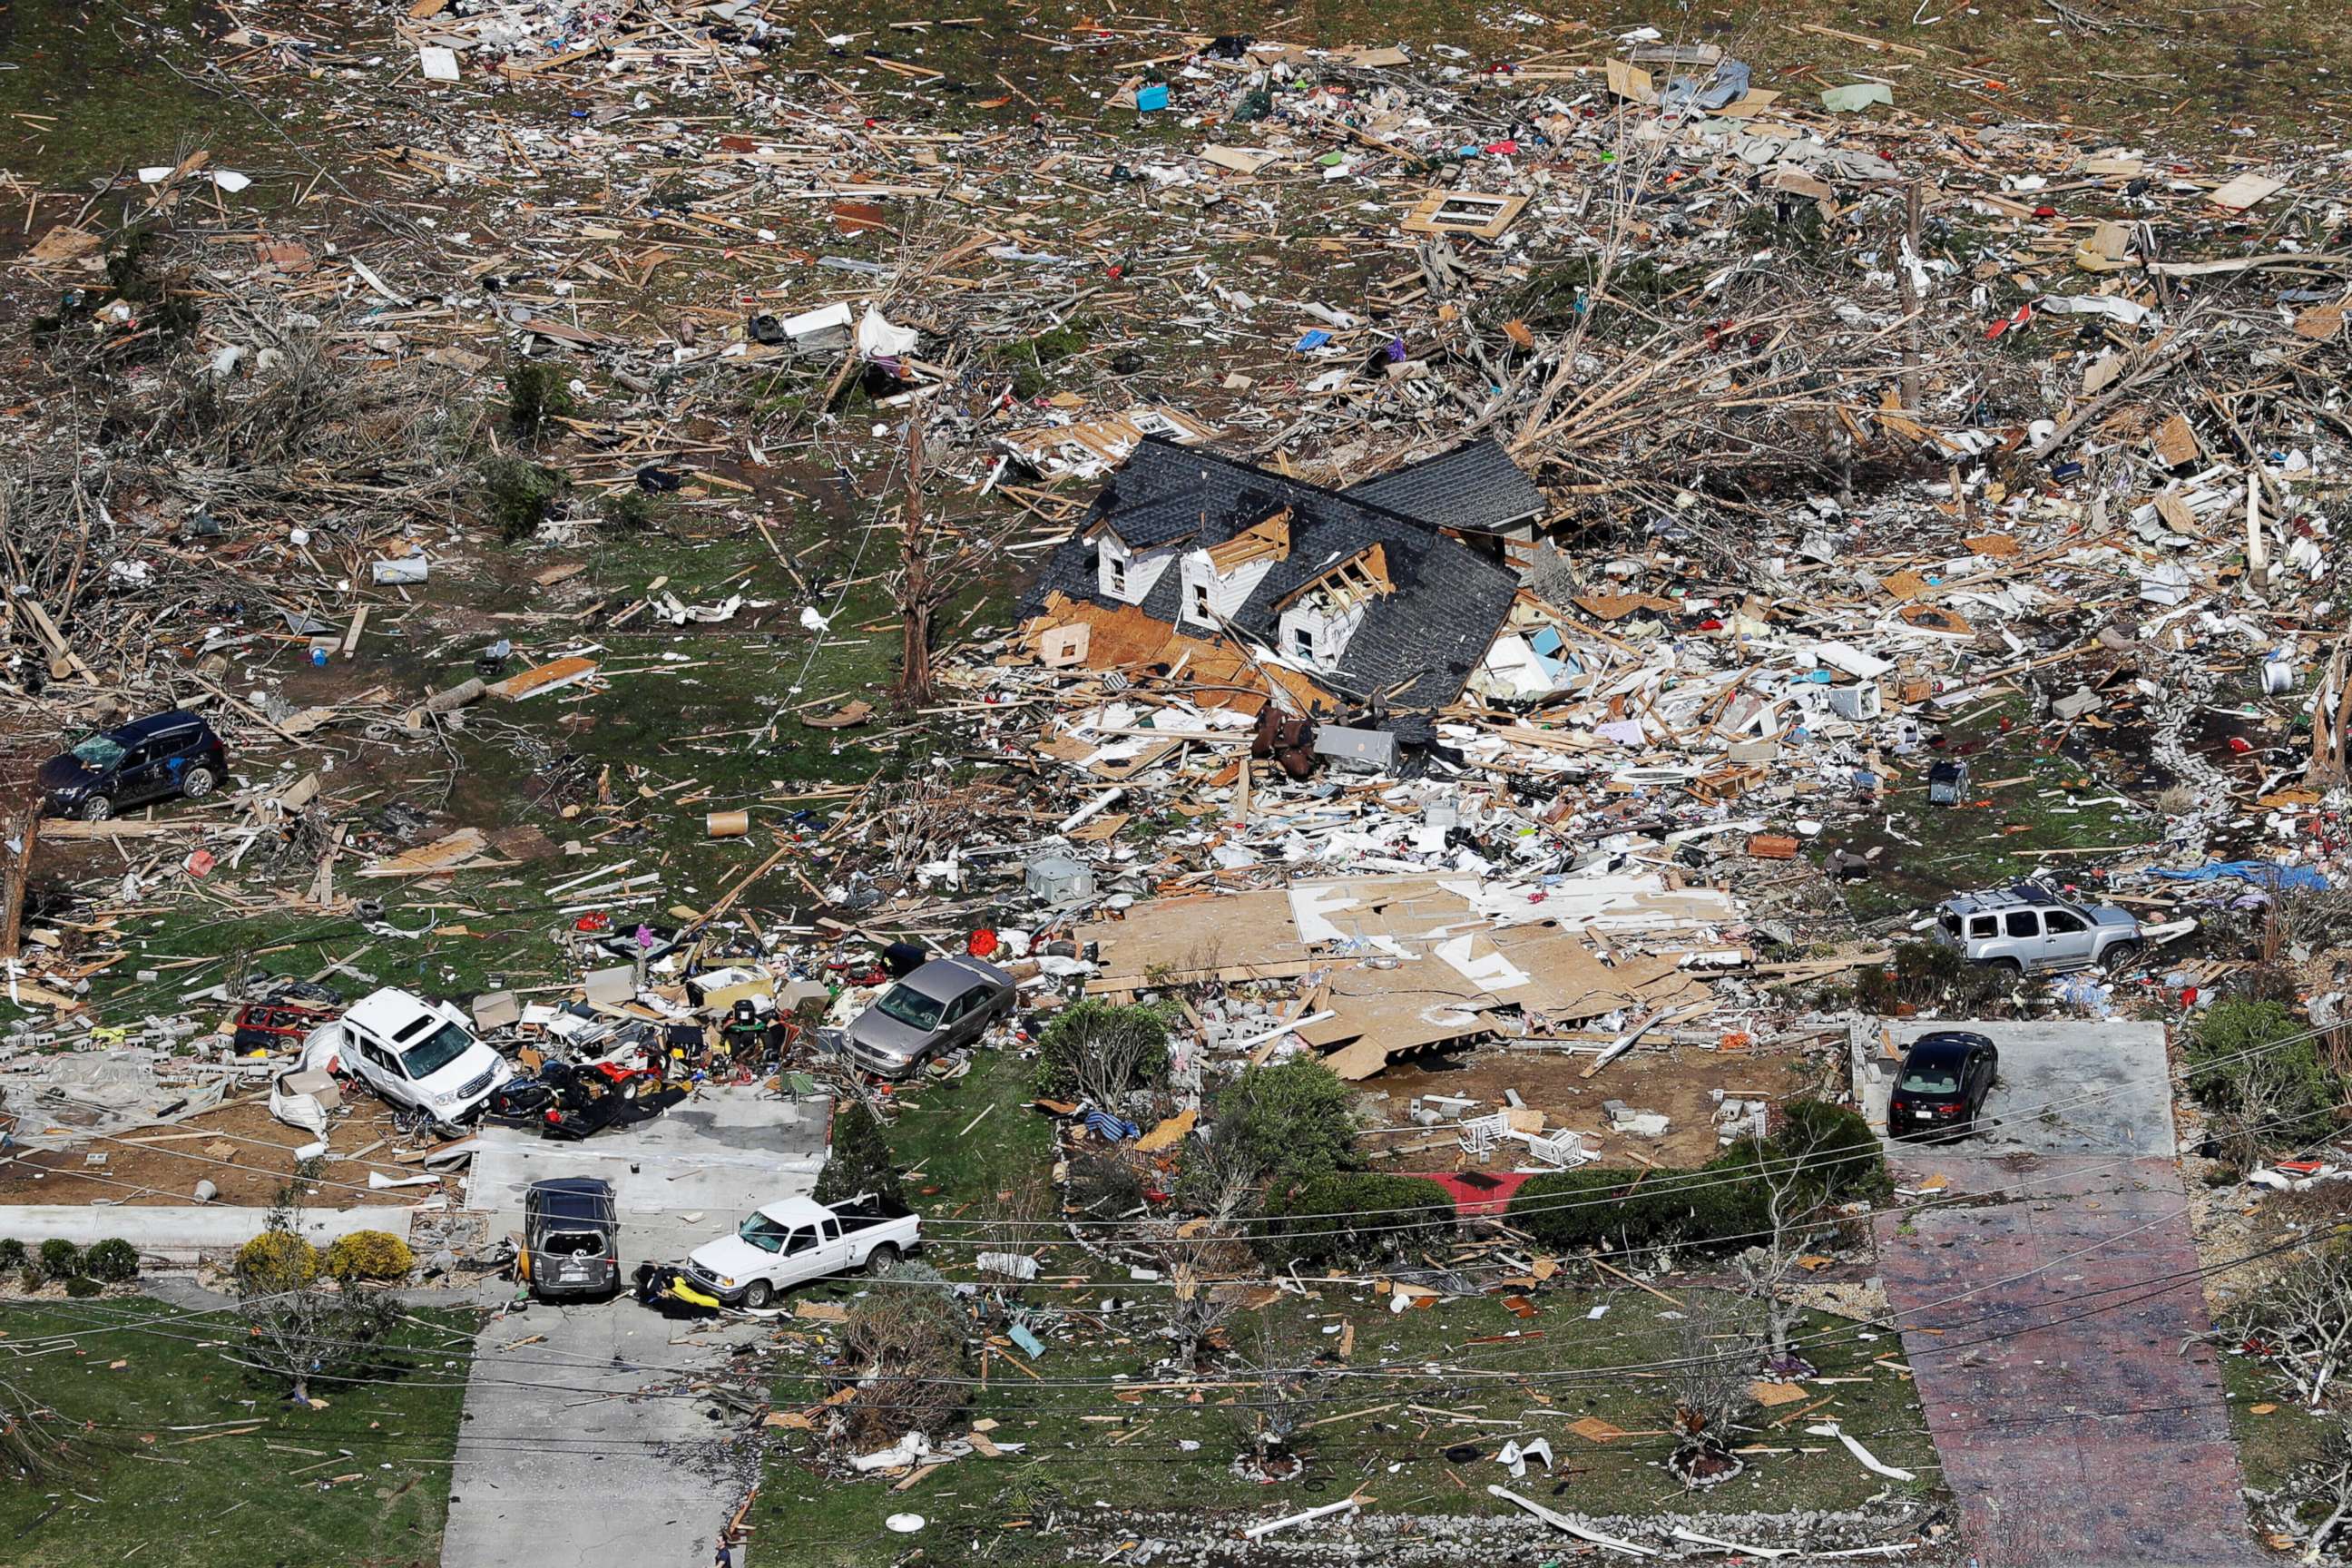 PHOTO: The remains of homes shattered by storms are scattered near Cookeville, Tenn., March 3, 2020.